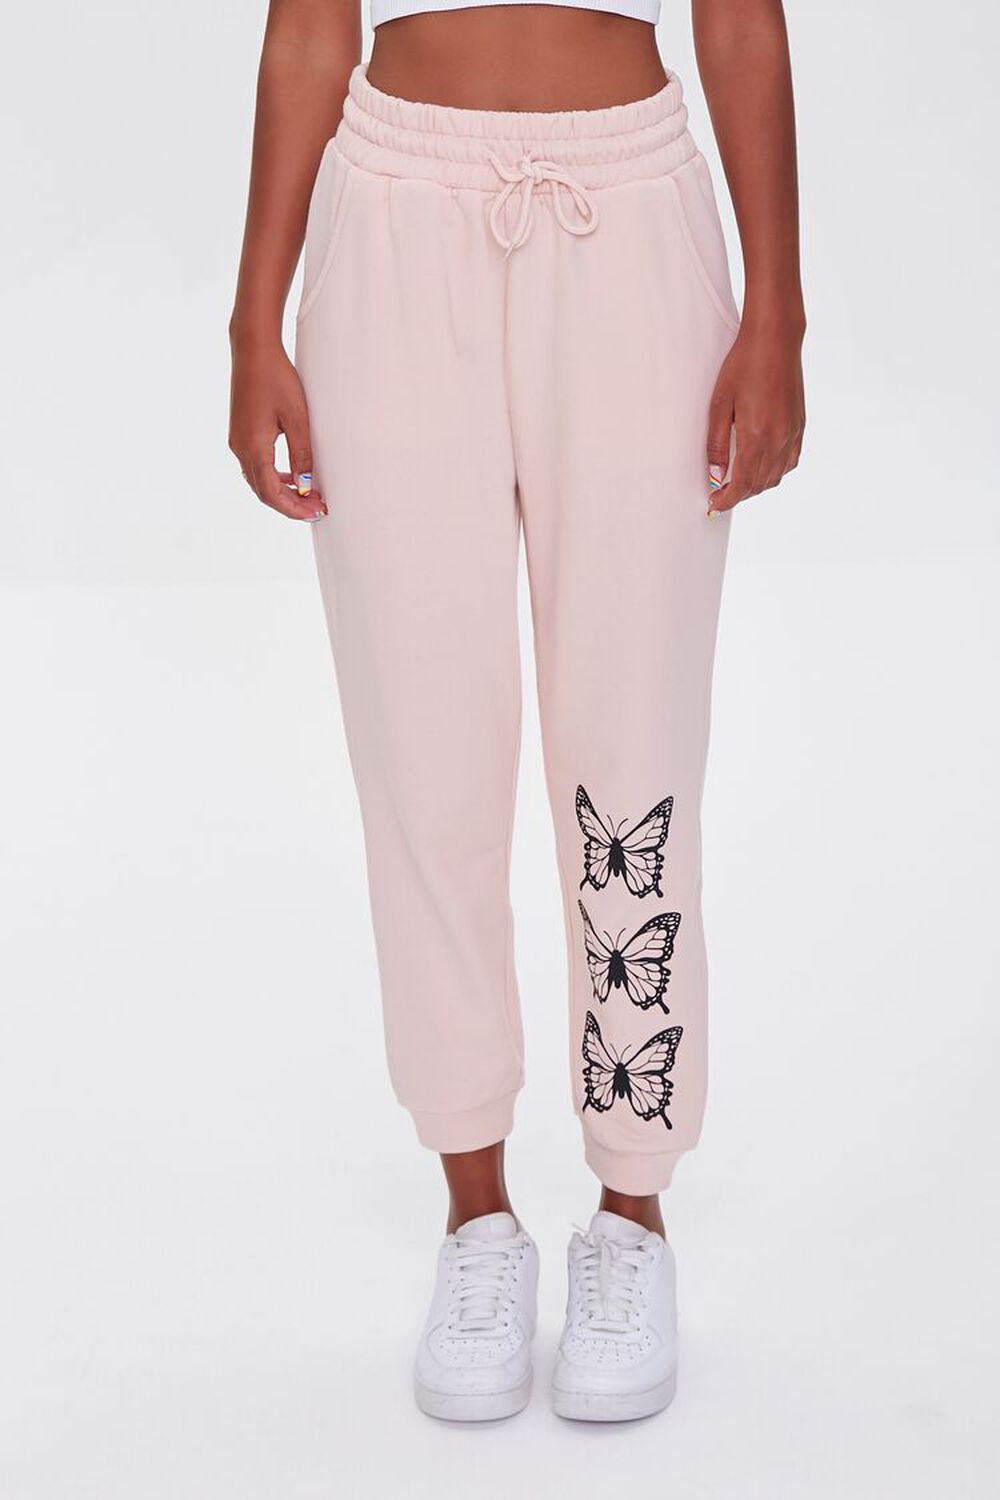 ROSE Butterfly French Terry Joggers, image 2